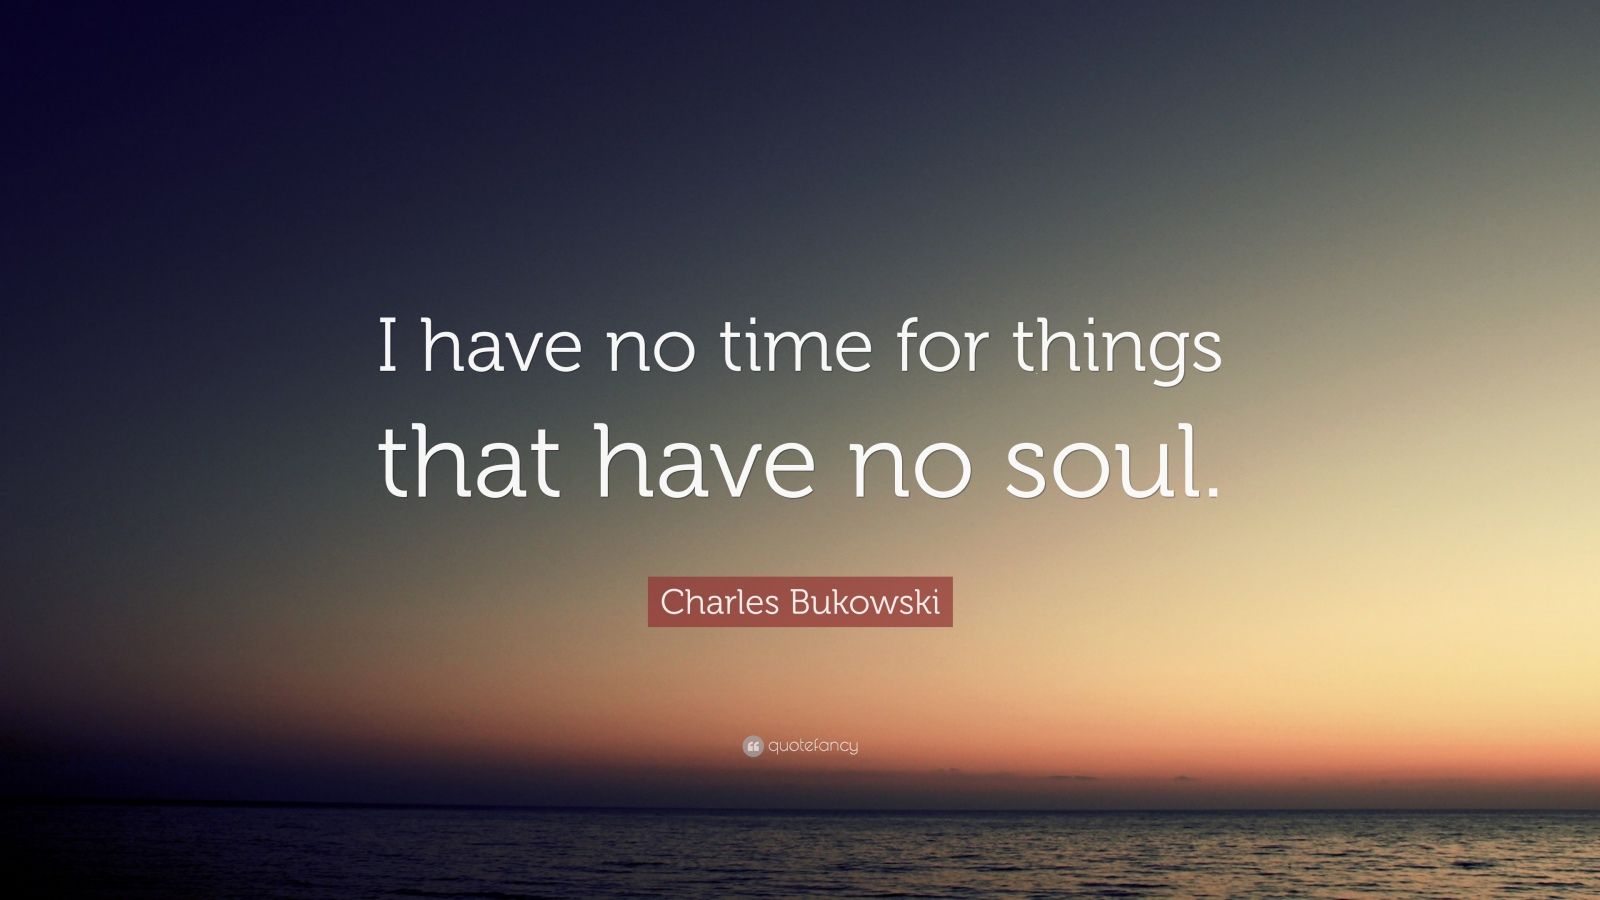 Charles Bukowski Quote: "I have no time for things that have no soul." (15 wallpapers) - Quotefancy